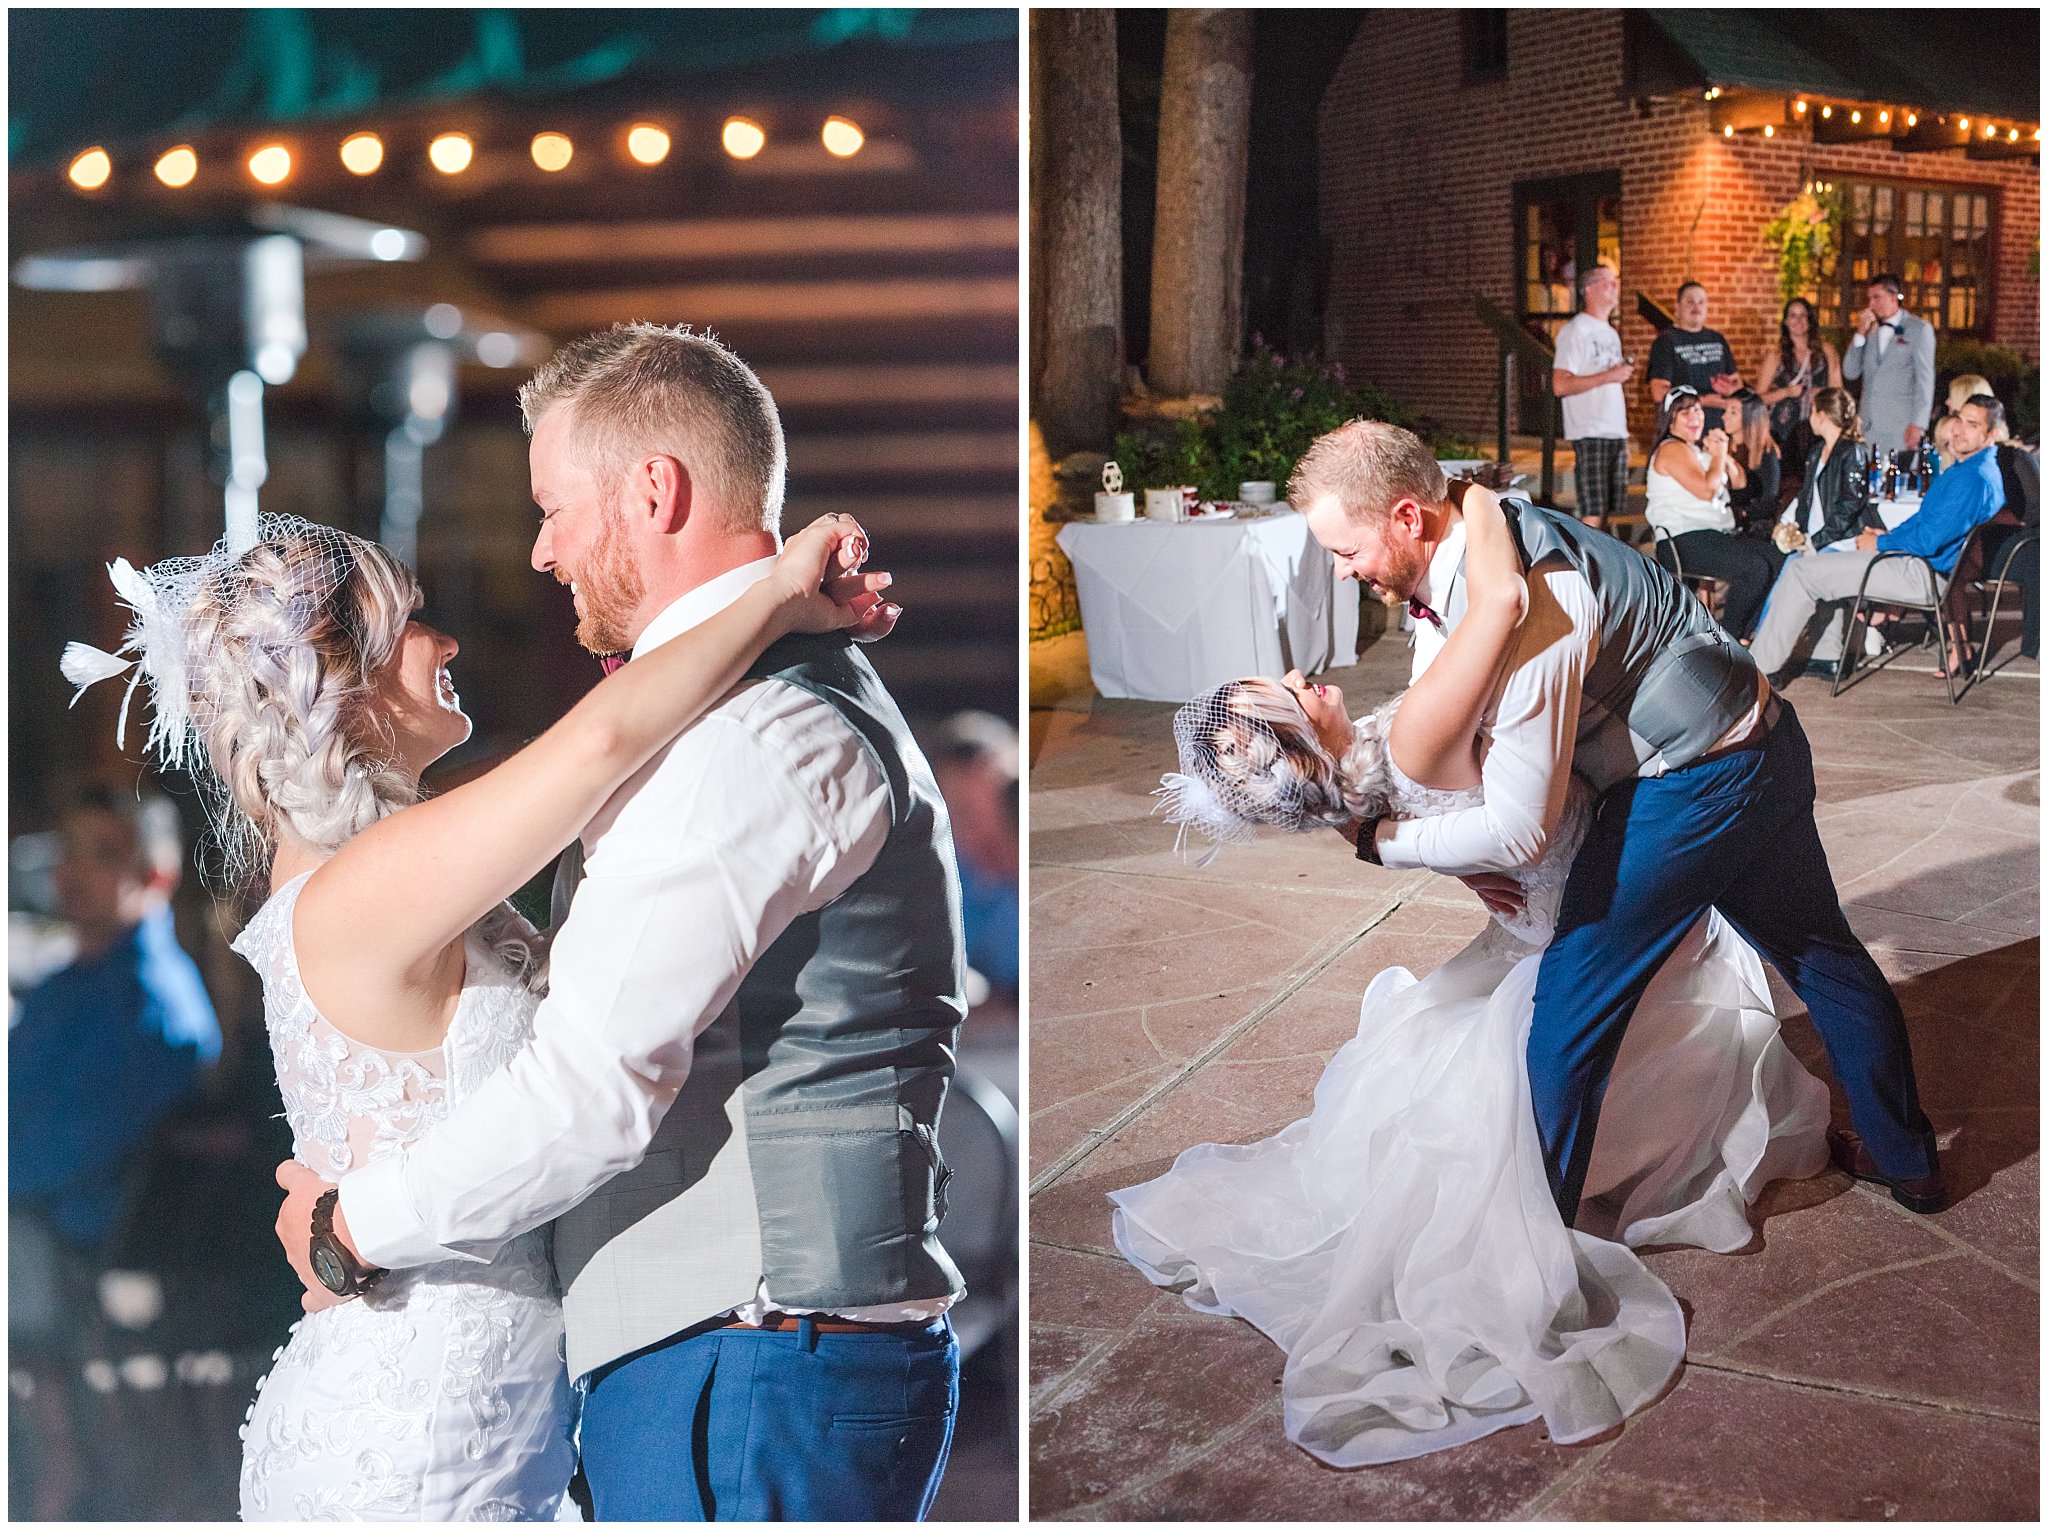 Bride and groom first dance during wedding reception | Log Haven Summer Mountain Wedding | Jessie and Dallin Photography